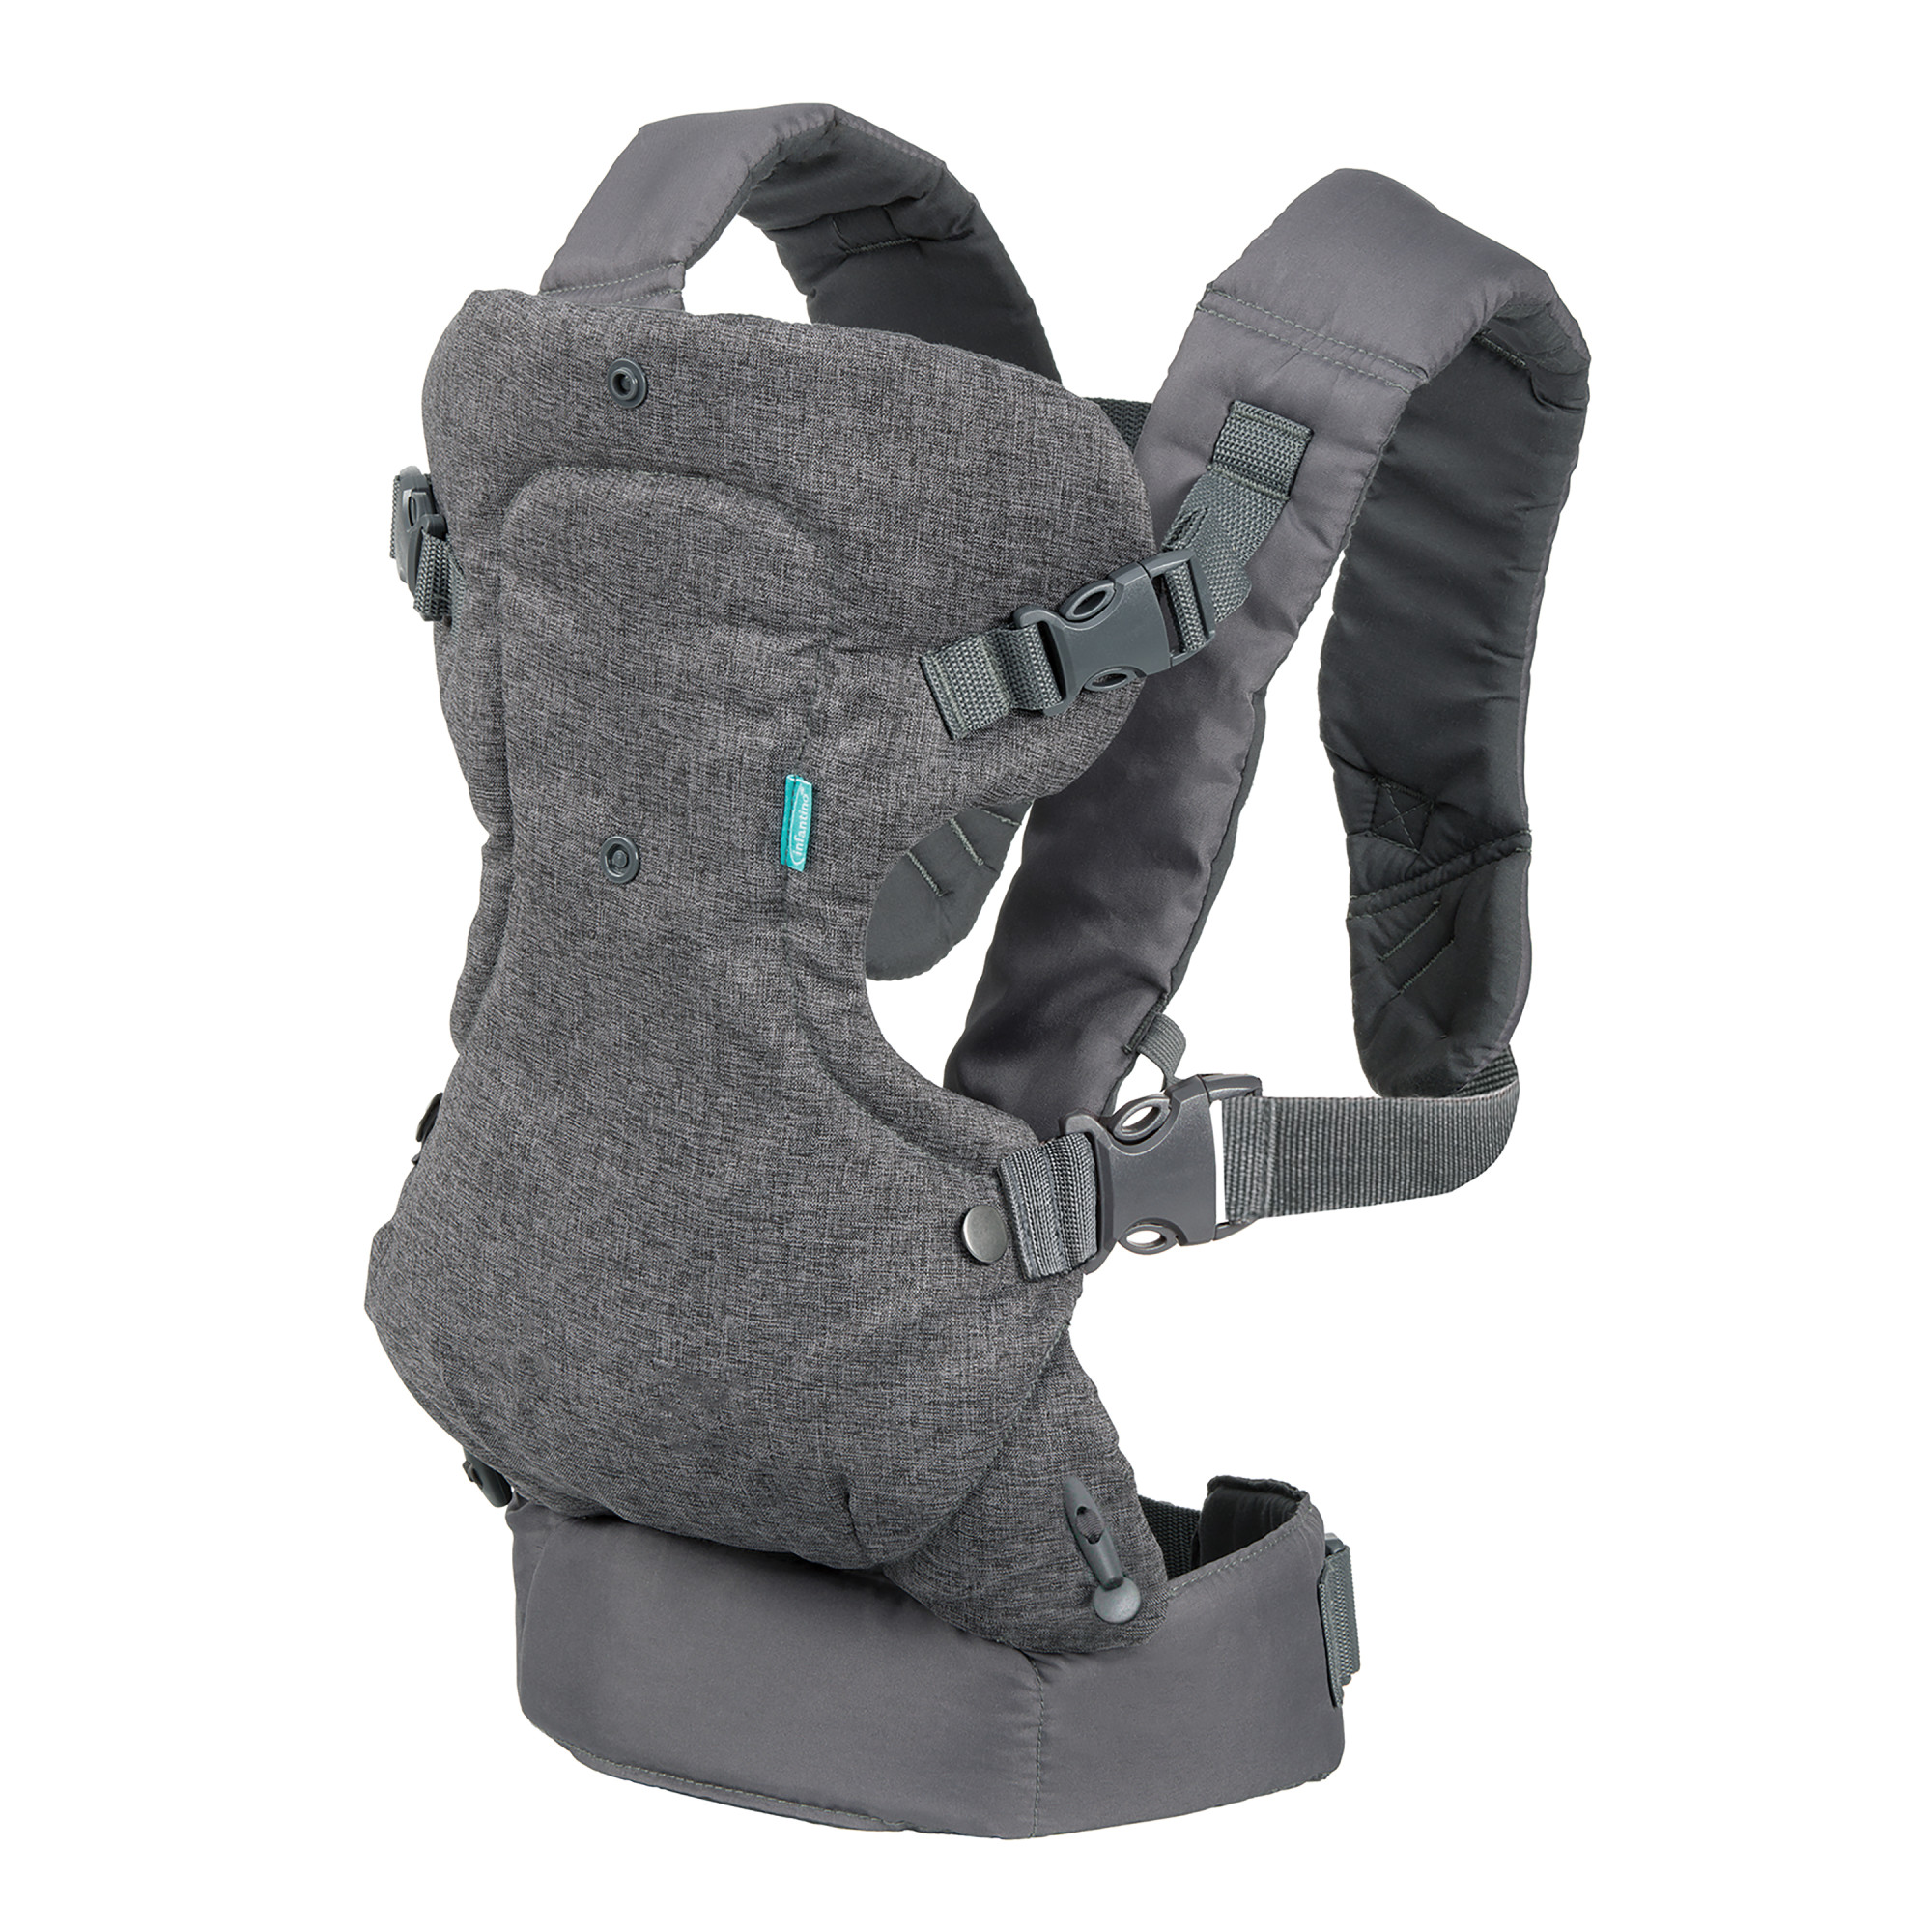 Infantino Flip 4-in-1 Convertible Baby Carrier, 4-Position, Unisex, 8-32lb, Gray - image 1 of 9